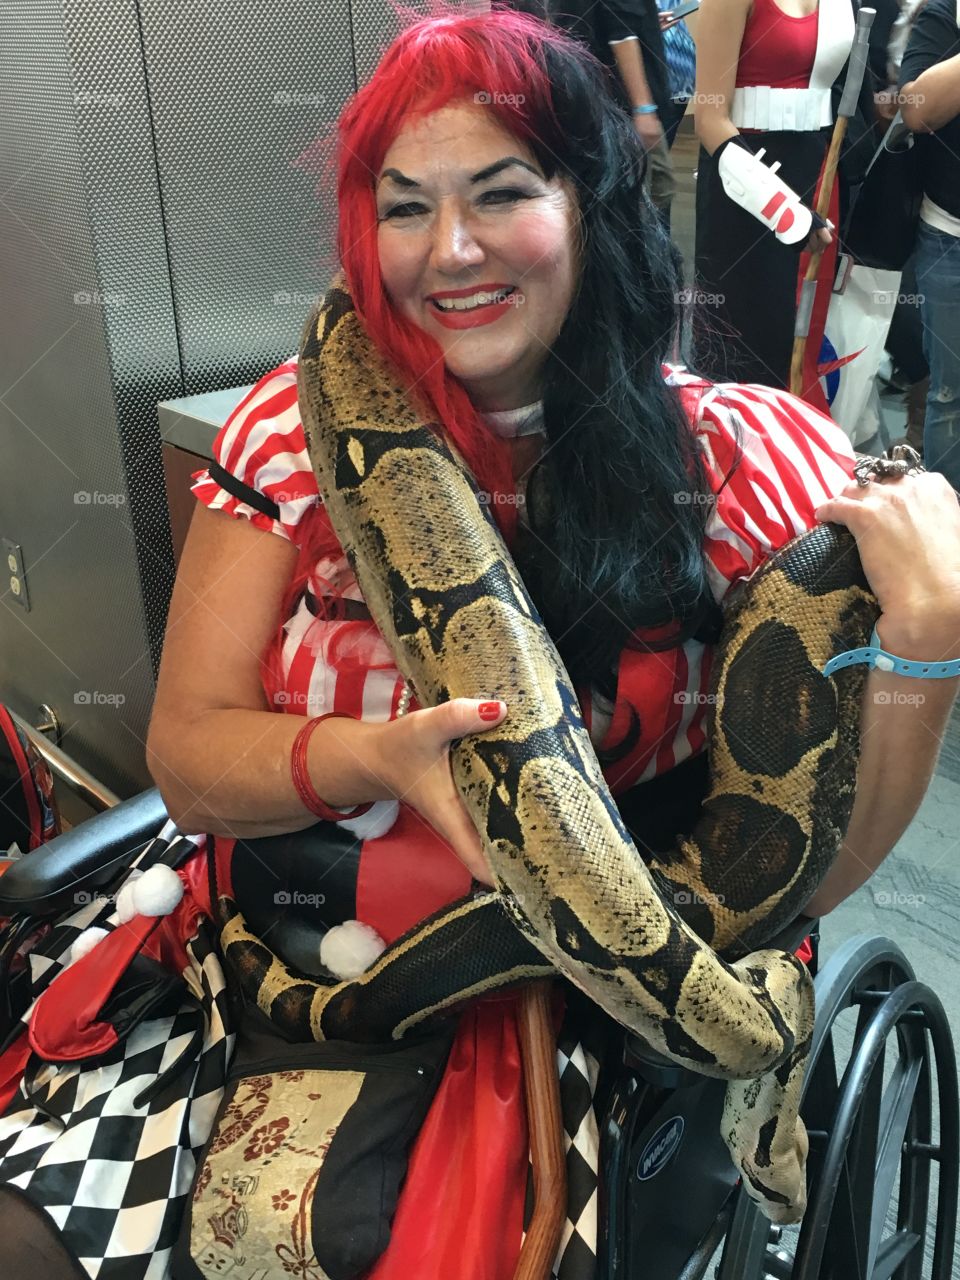 Harley Quinn in a wheel chair at San Jose Comicon smiling while holding a giant snake 